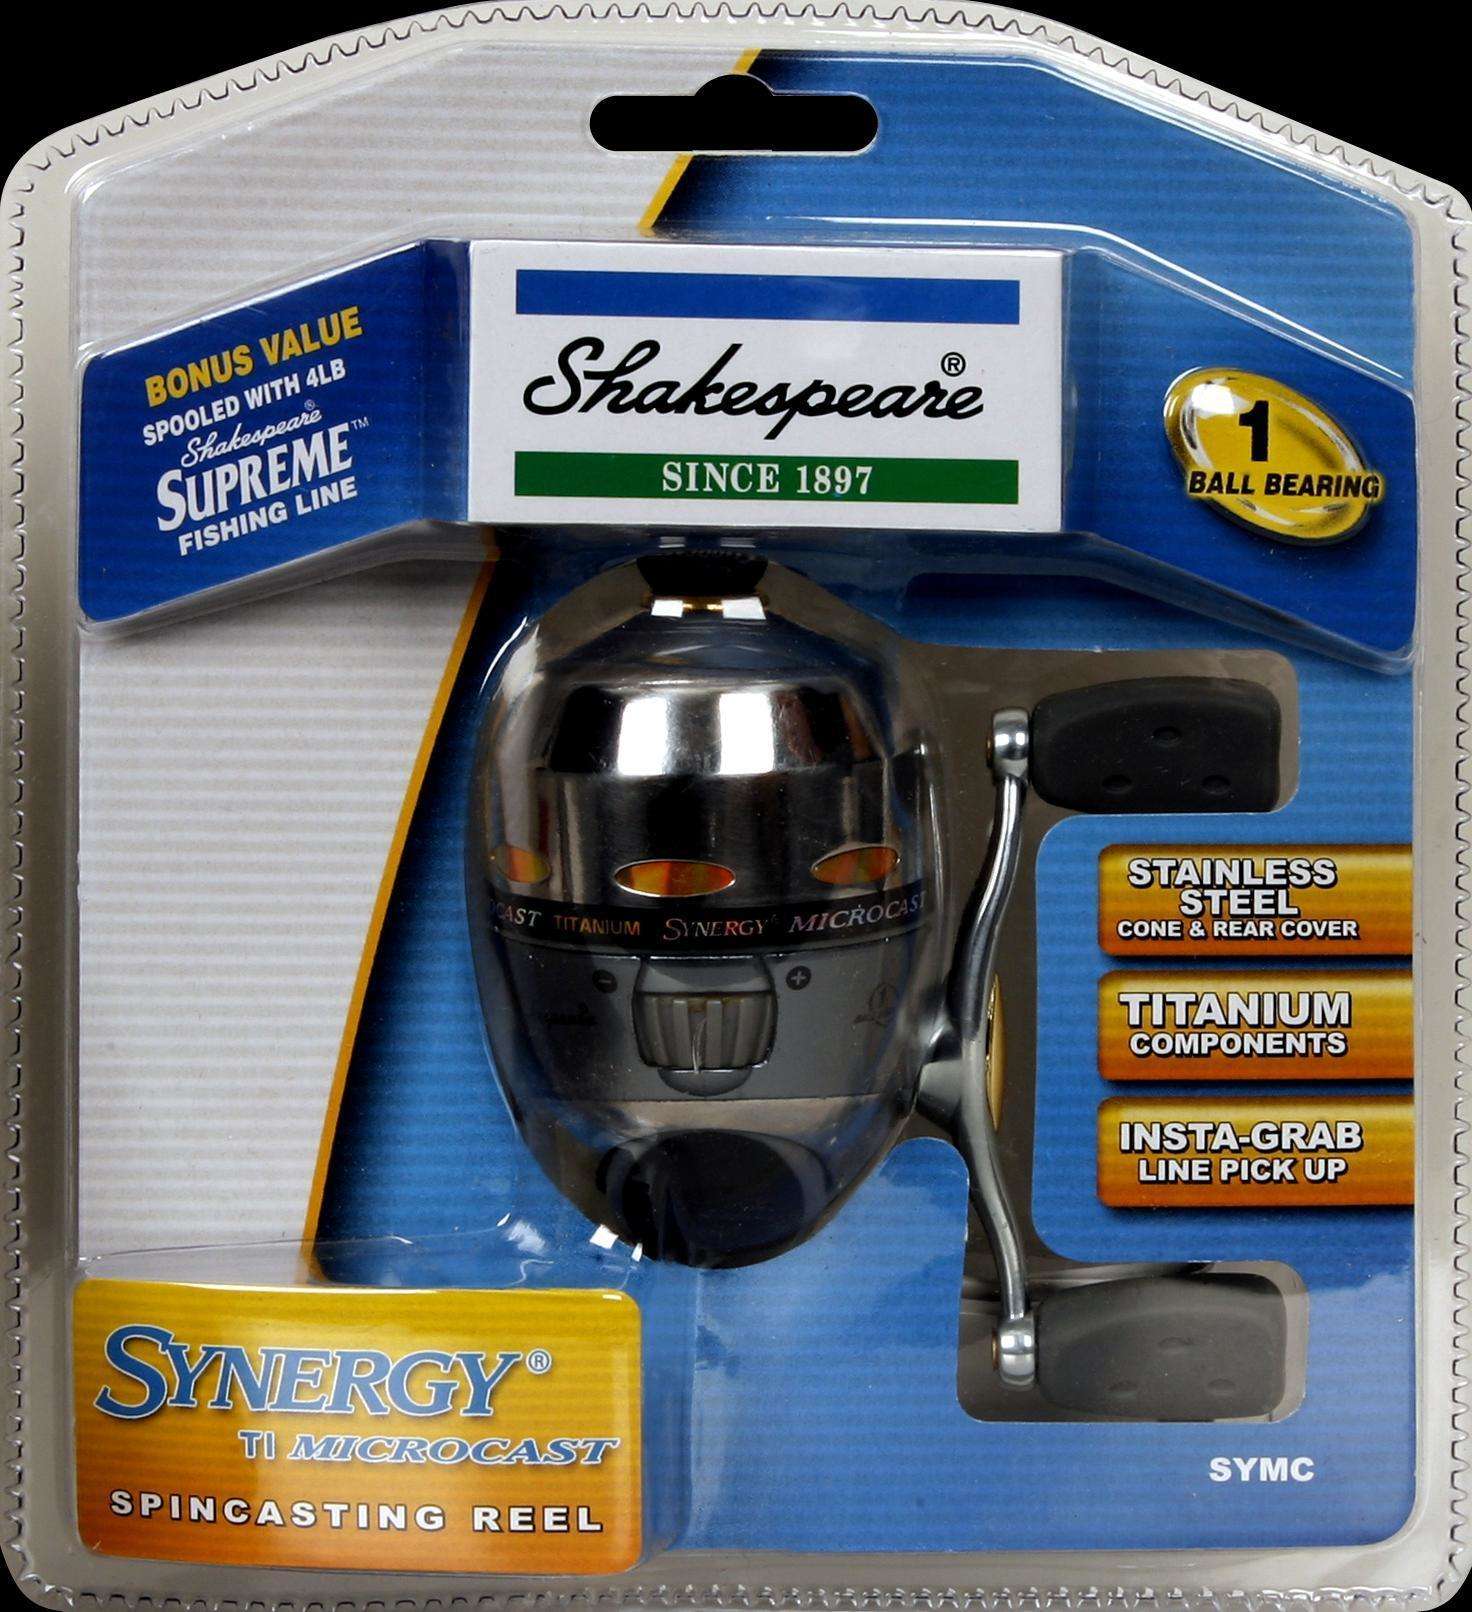 Shakespeare Synergy TI Microspin Spincasting Fishing Reel